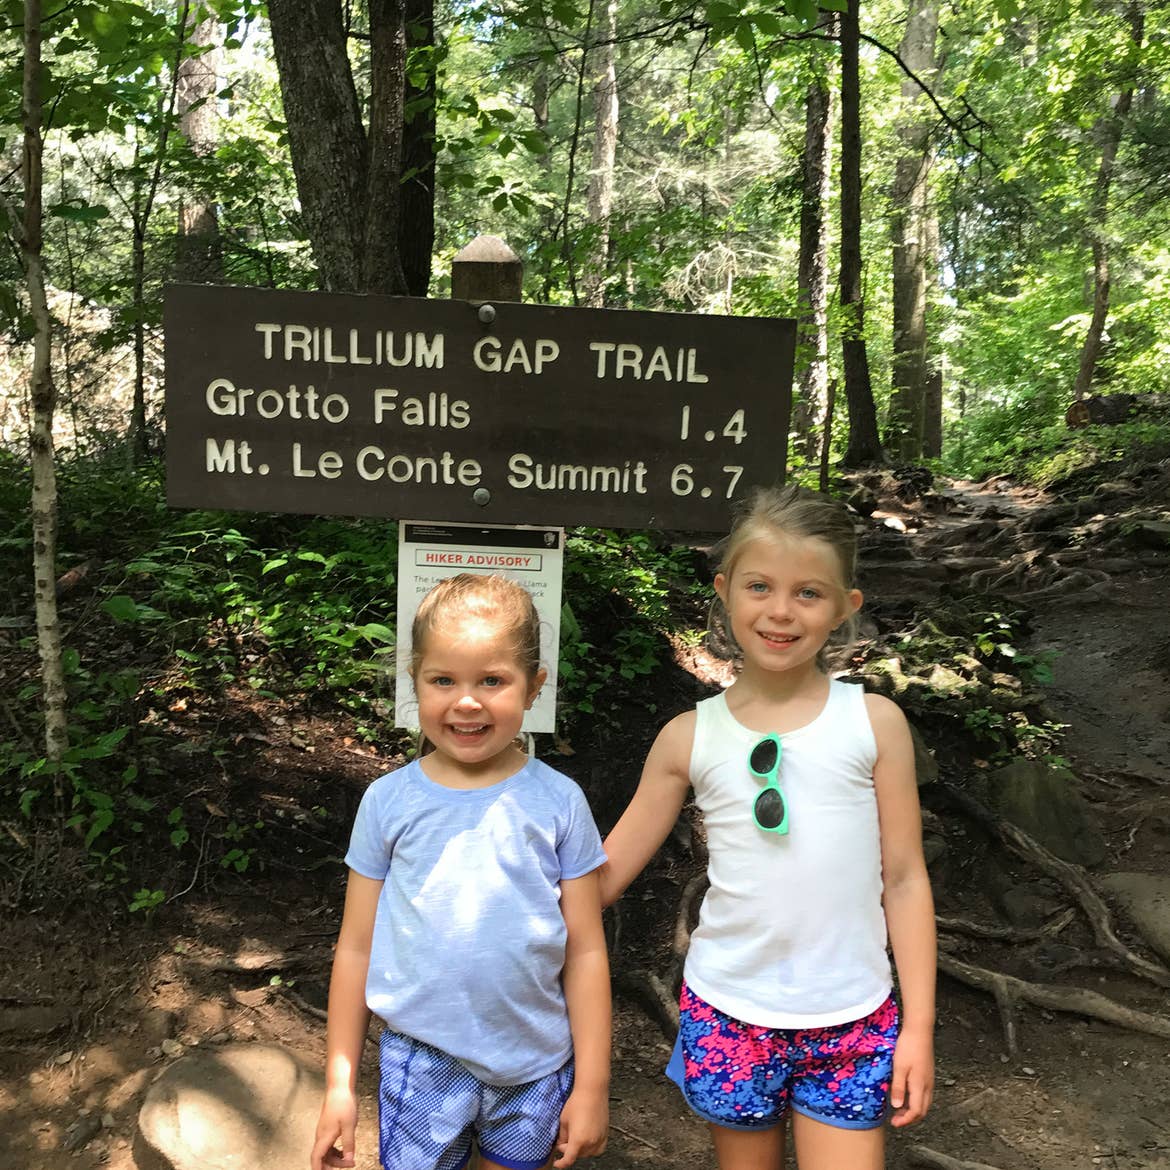 Author, Chris Johnstons' daughters, Kyndall (right), and Kyler (left) pose with a brown, wooden sign that reads, 'Trillium Gap Trail, Grotto Falls 1.4, Mt. LeConte, Summit 6.7.'